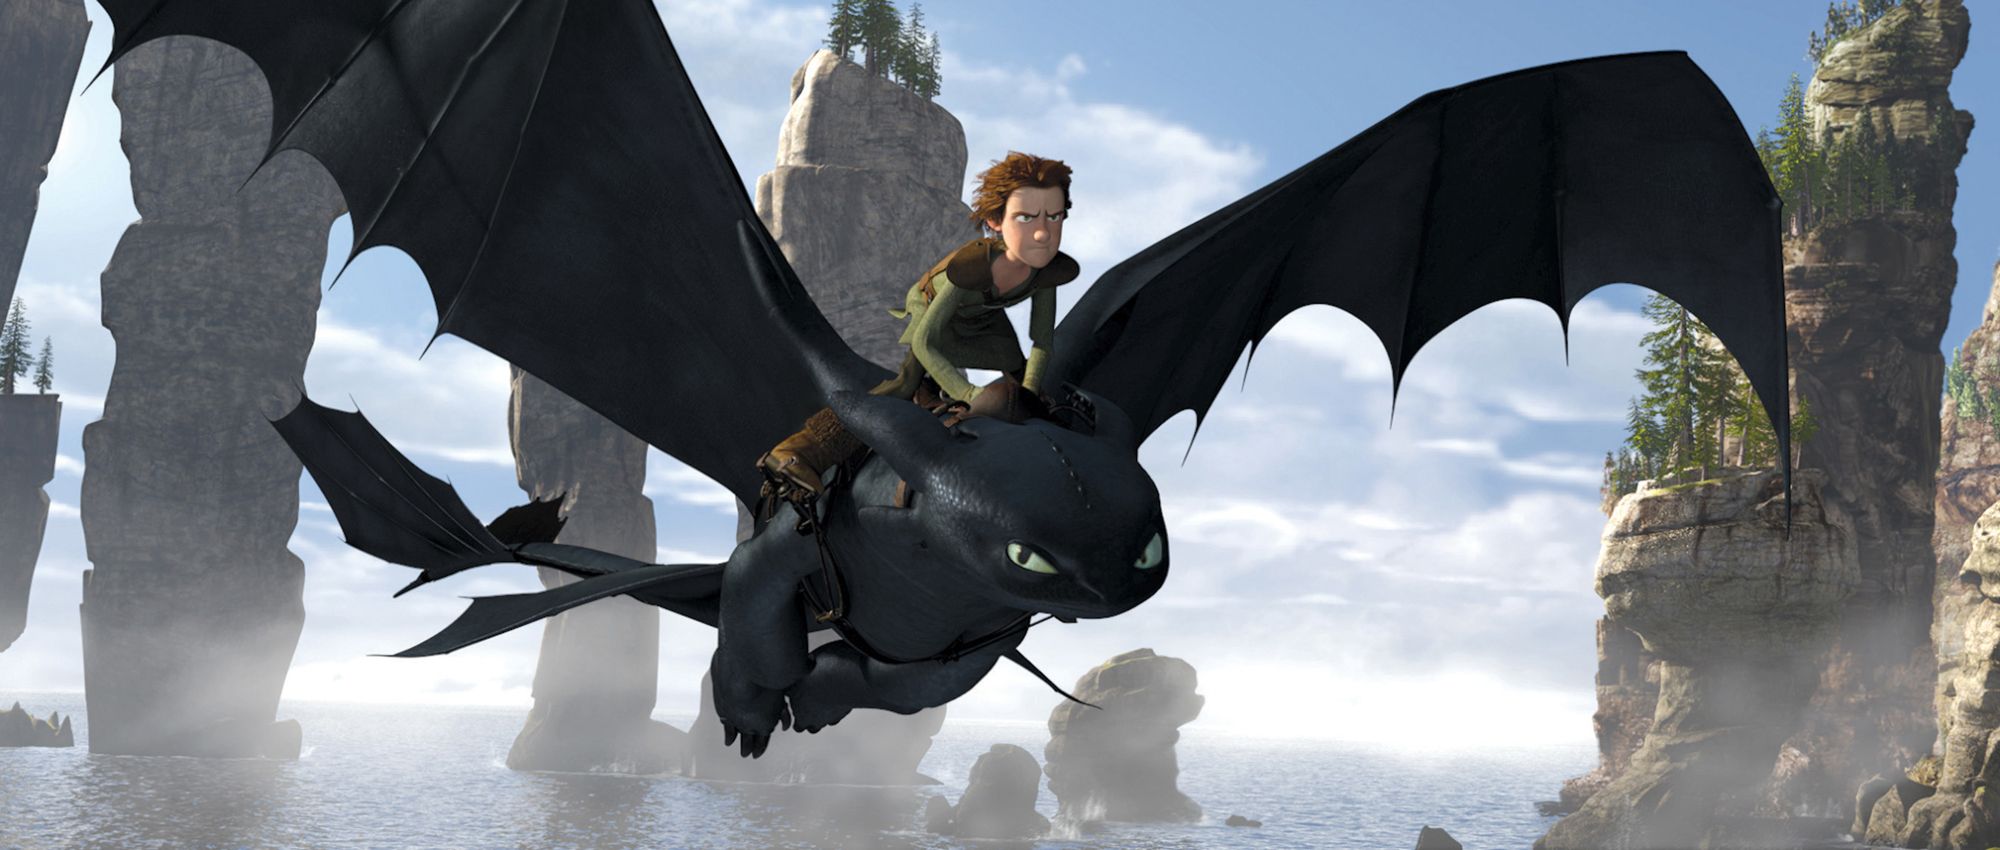 How To Train Your Dragon wallpaper, Movie, HQ How To Train Your